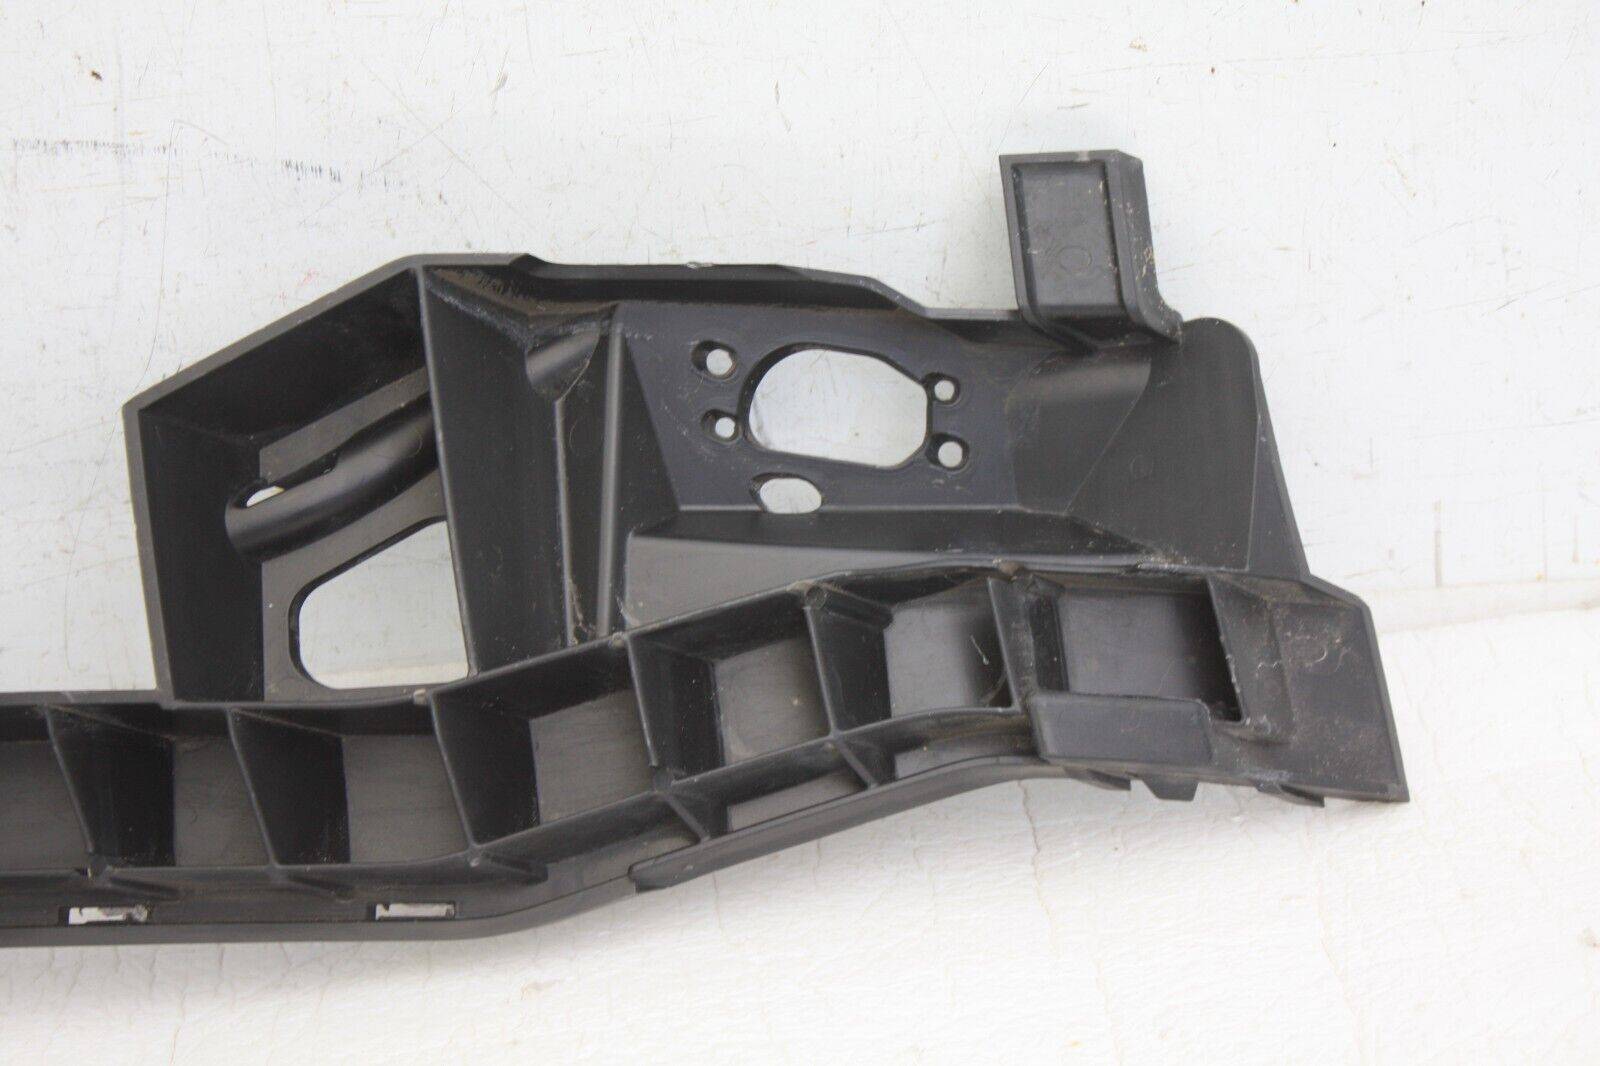 Audi-A6-S-Line-Front-Bumper-Right-Grill-Support-Bracket-2014-TO-2018-4G0807096F-176420161195-2